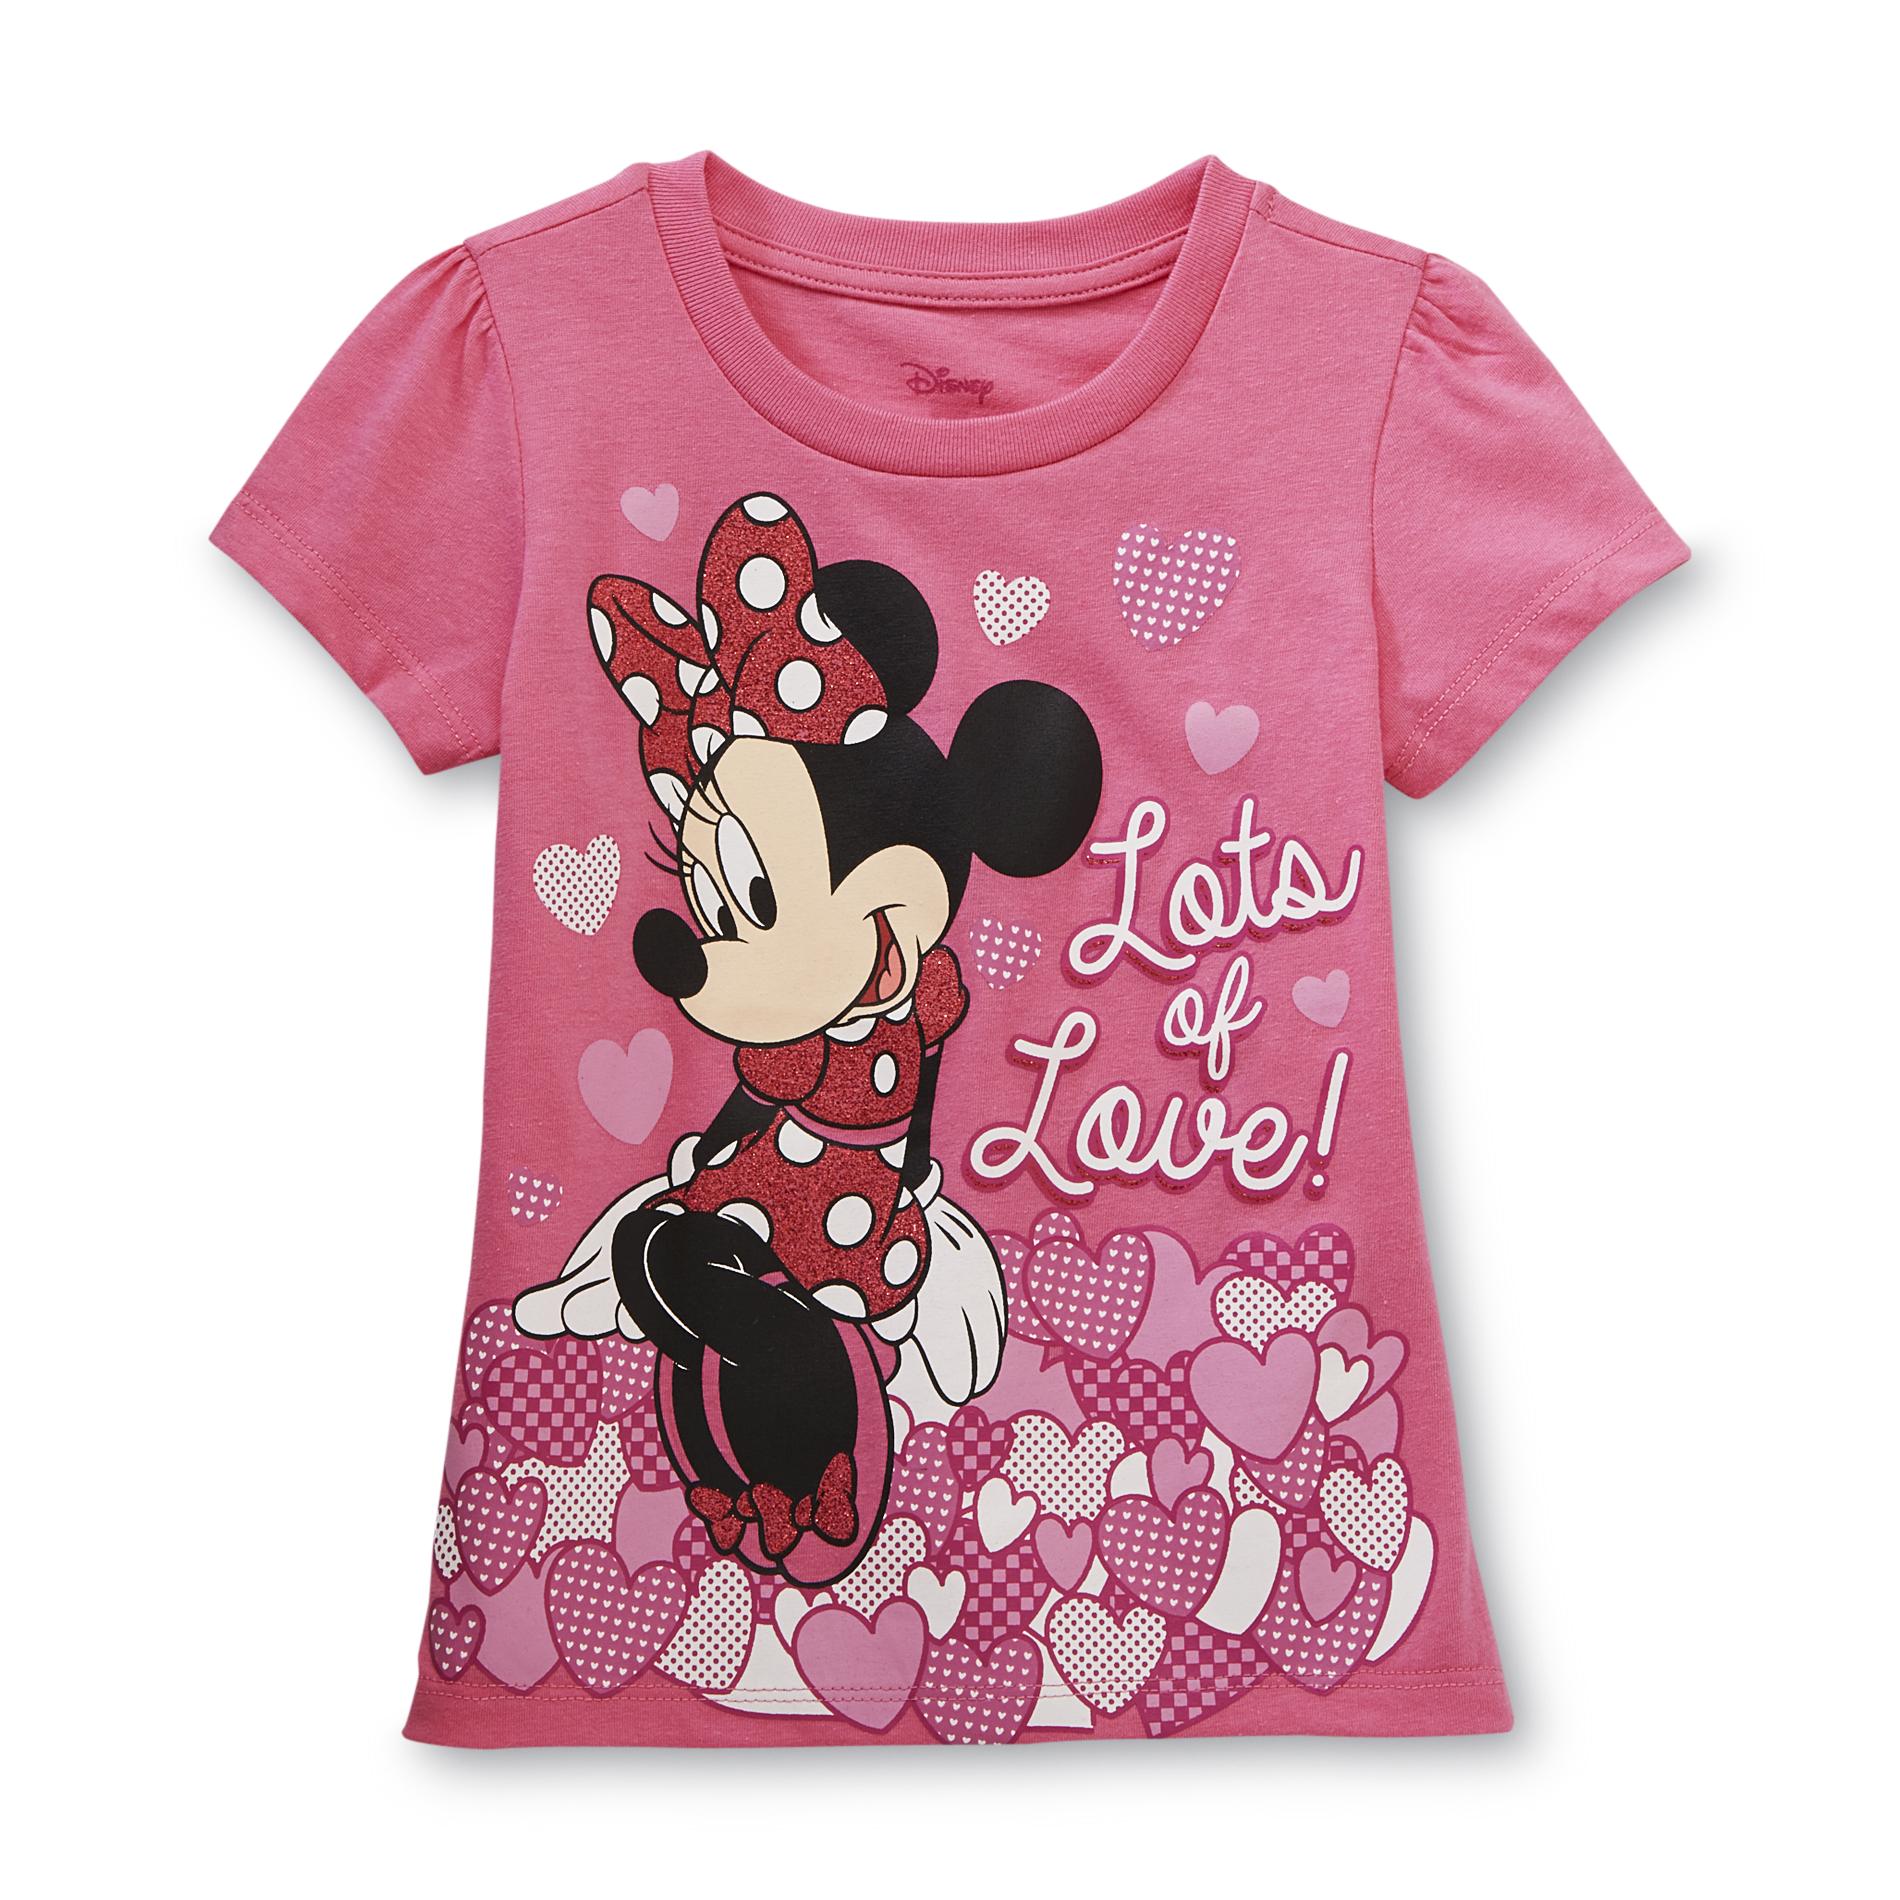 Disney Minnie Mouse Toddler Girl's Valentine's Day TShirt